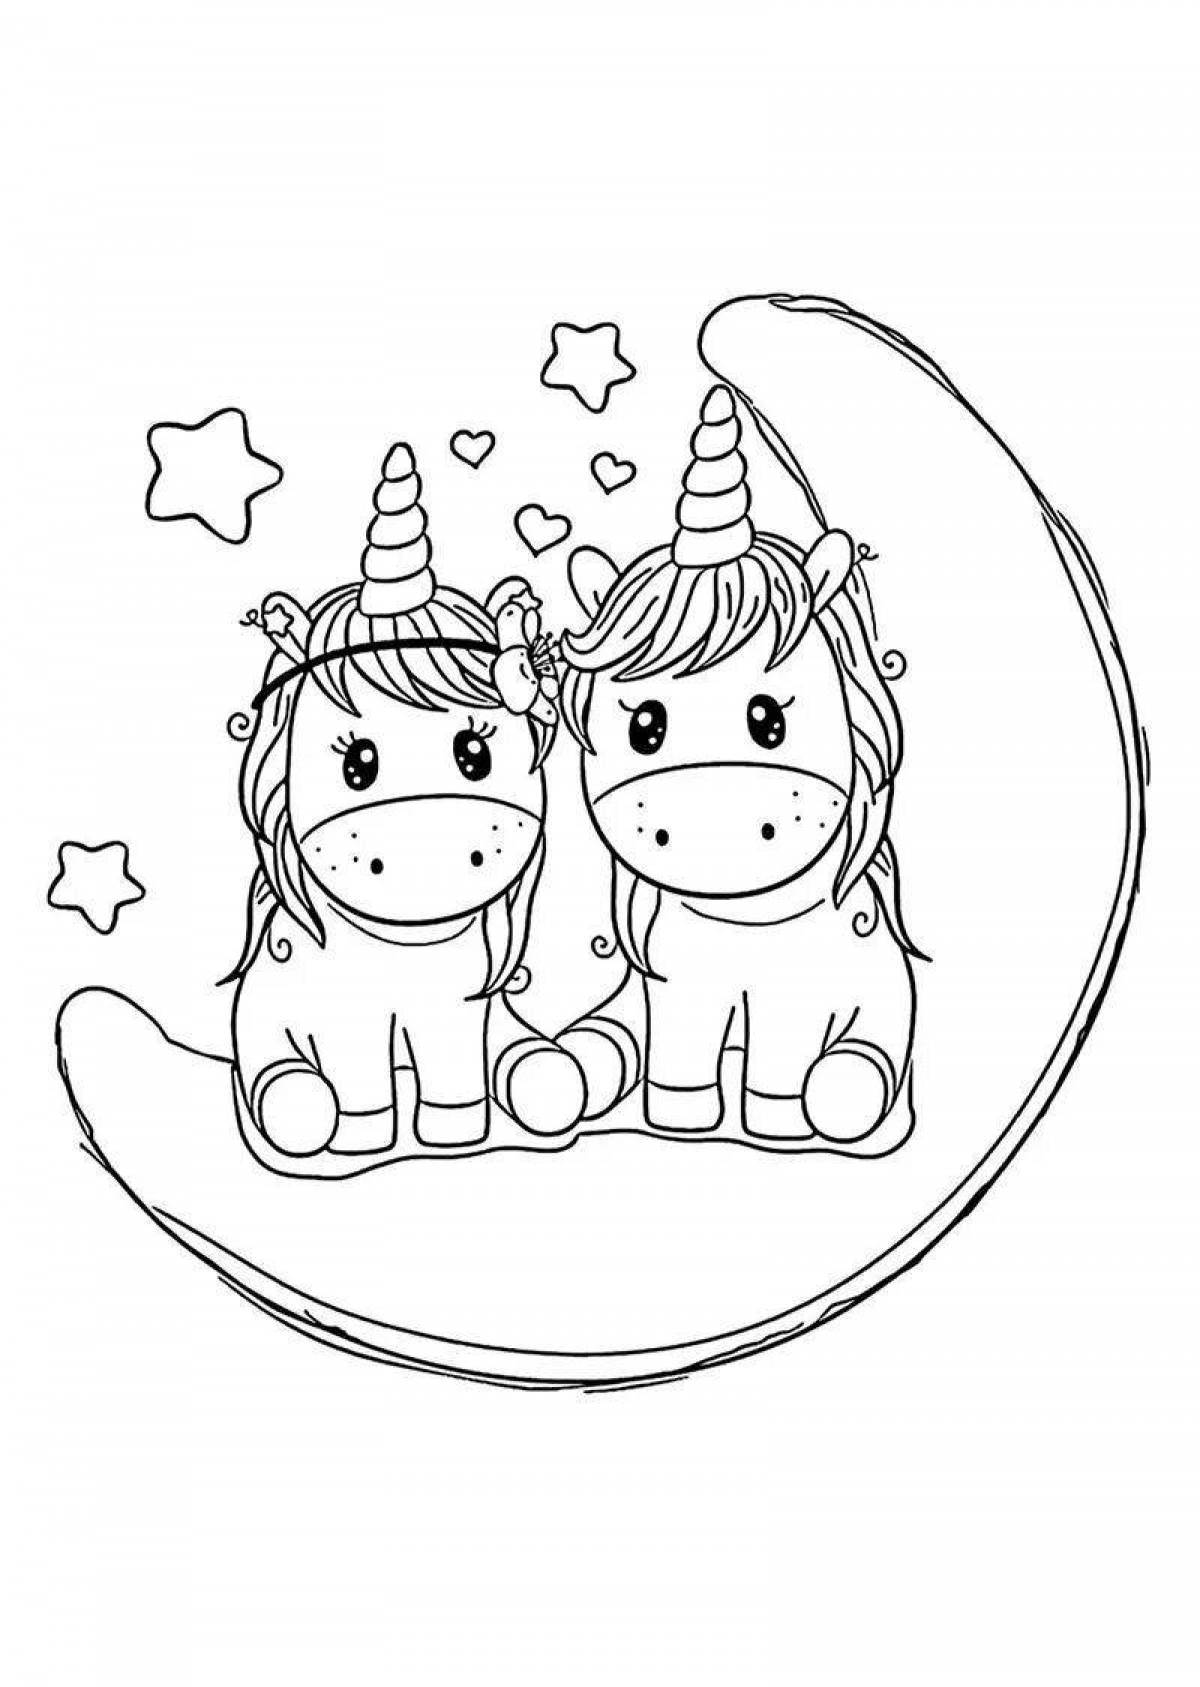 Unicorn drawing for kids #5